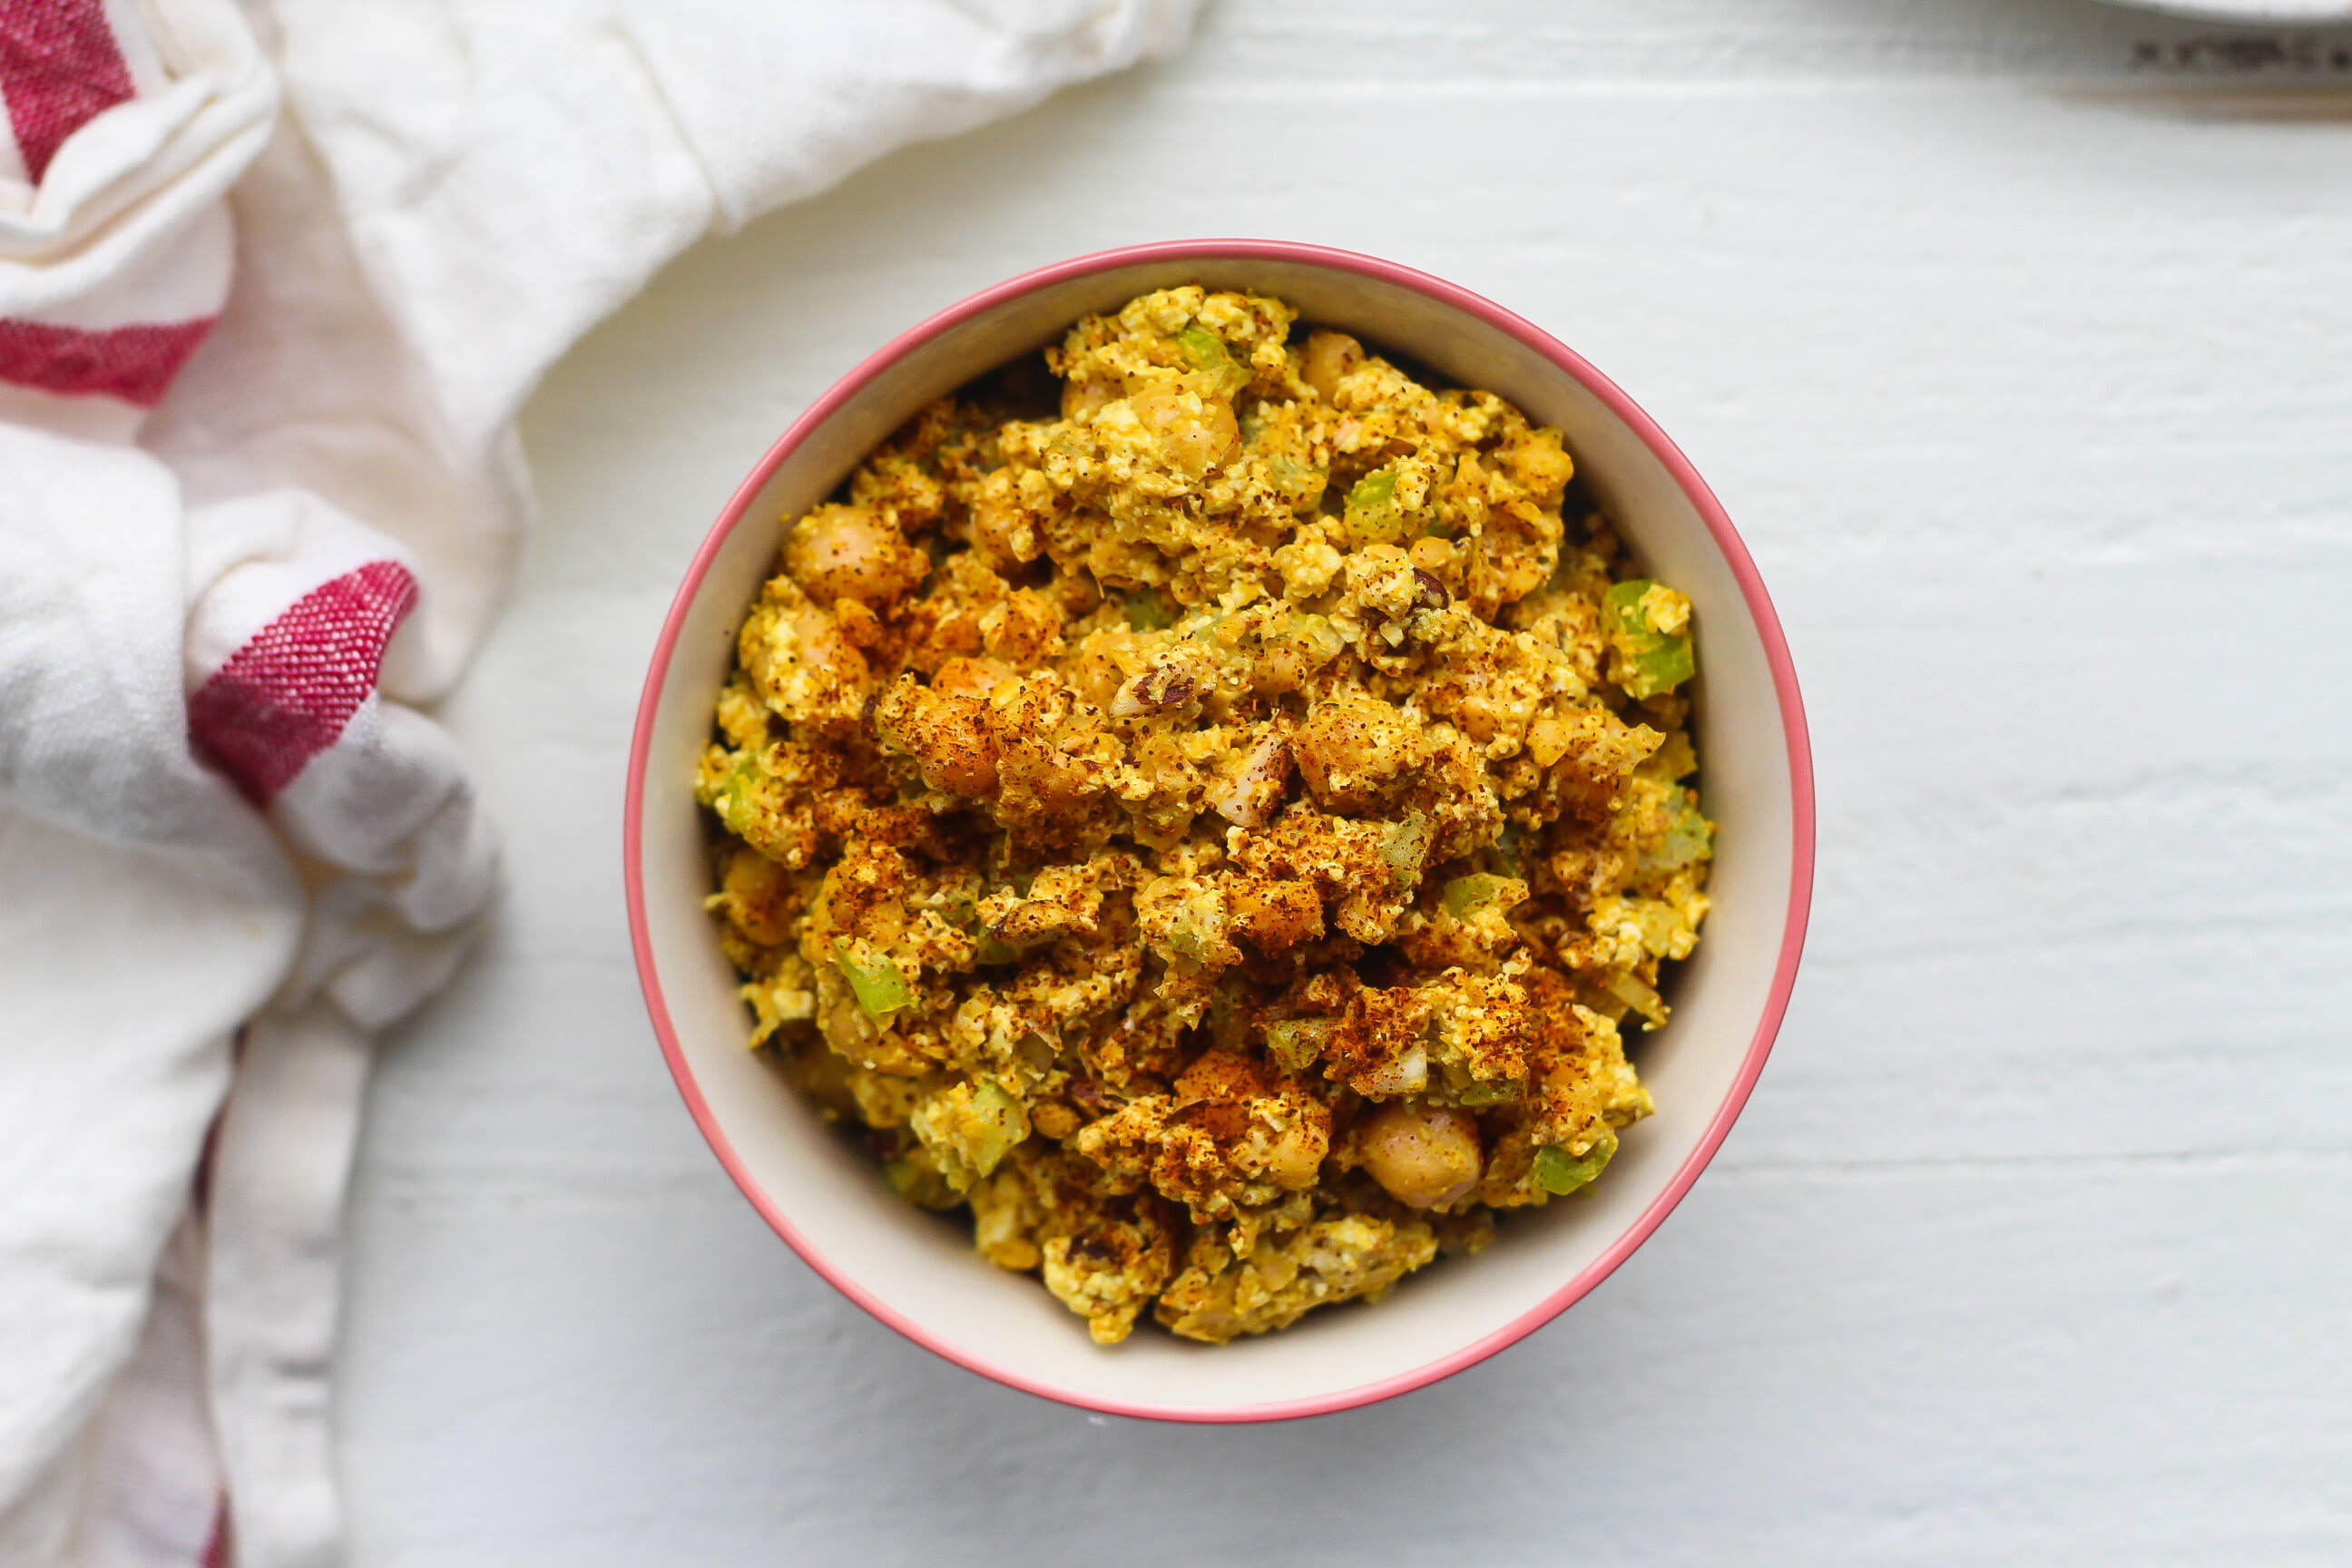 20 High Protein, Plant-Based Meals Your Clients Will Love: Eggless Egg Salad